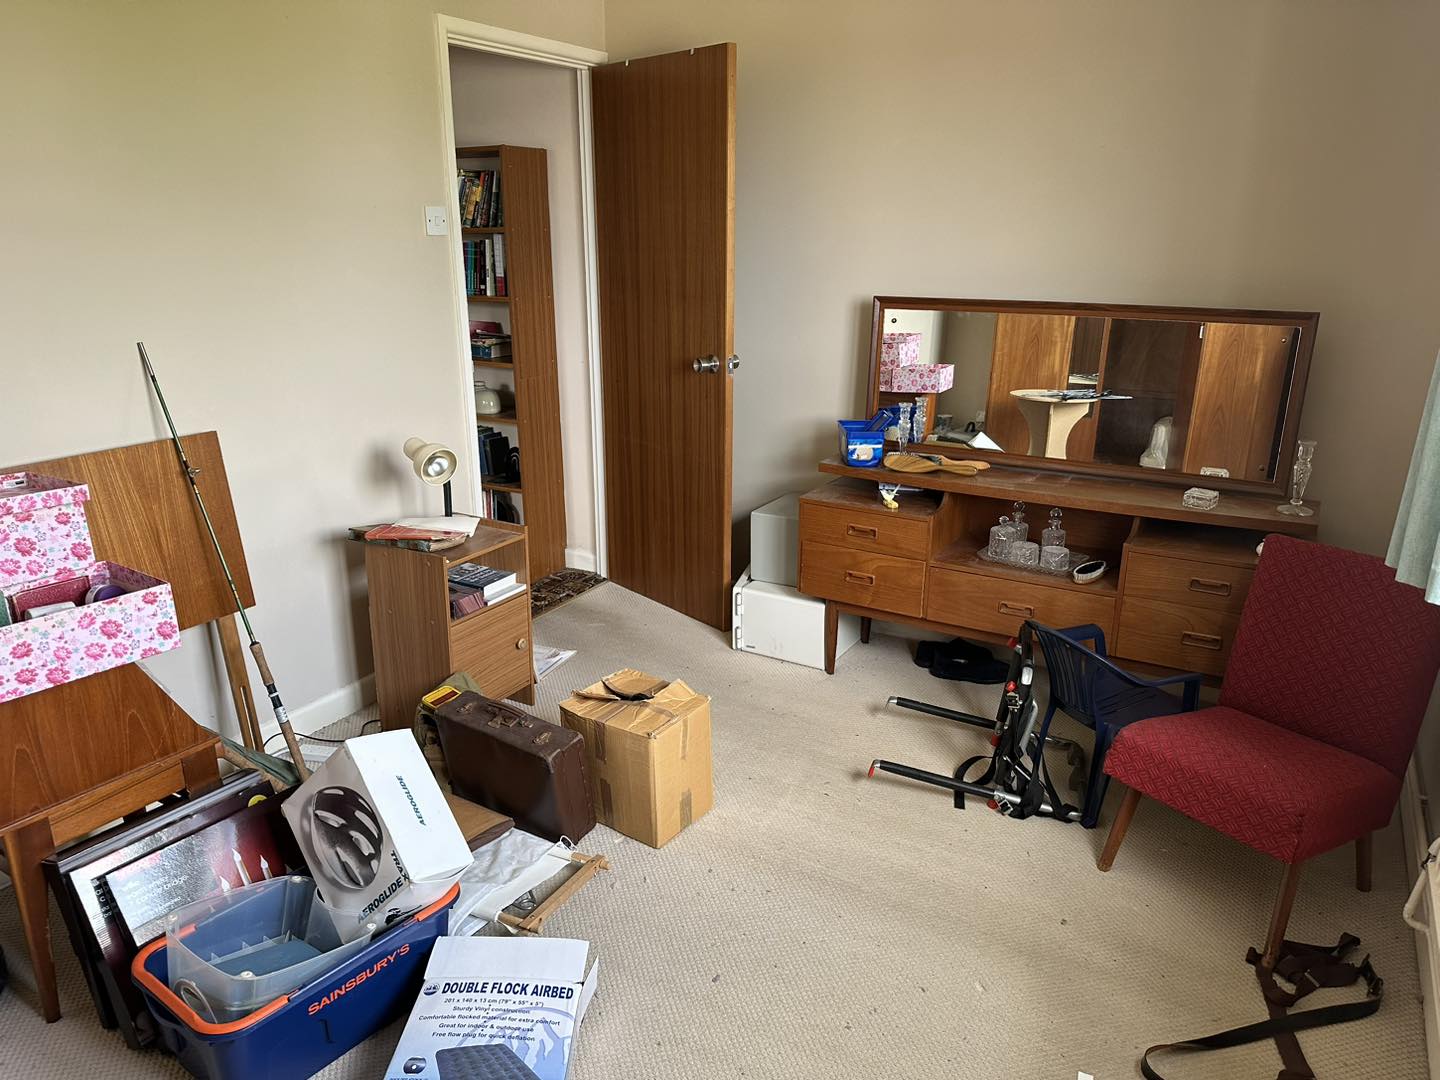 A photo of a bedroom in a house full of junk